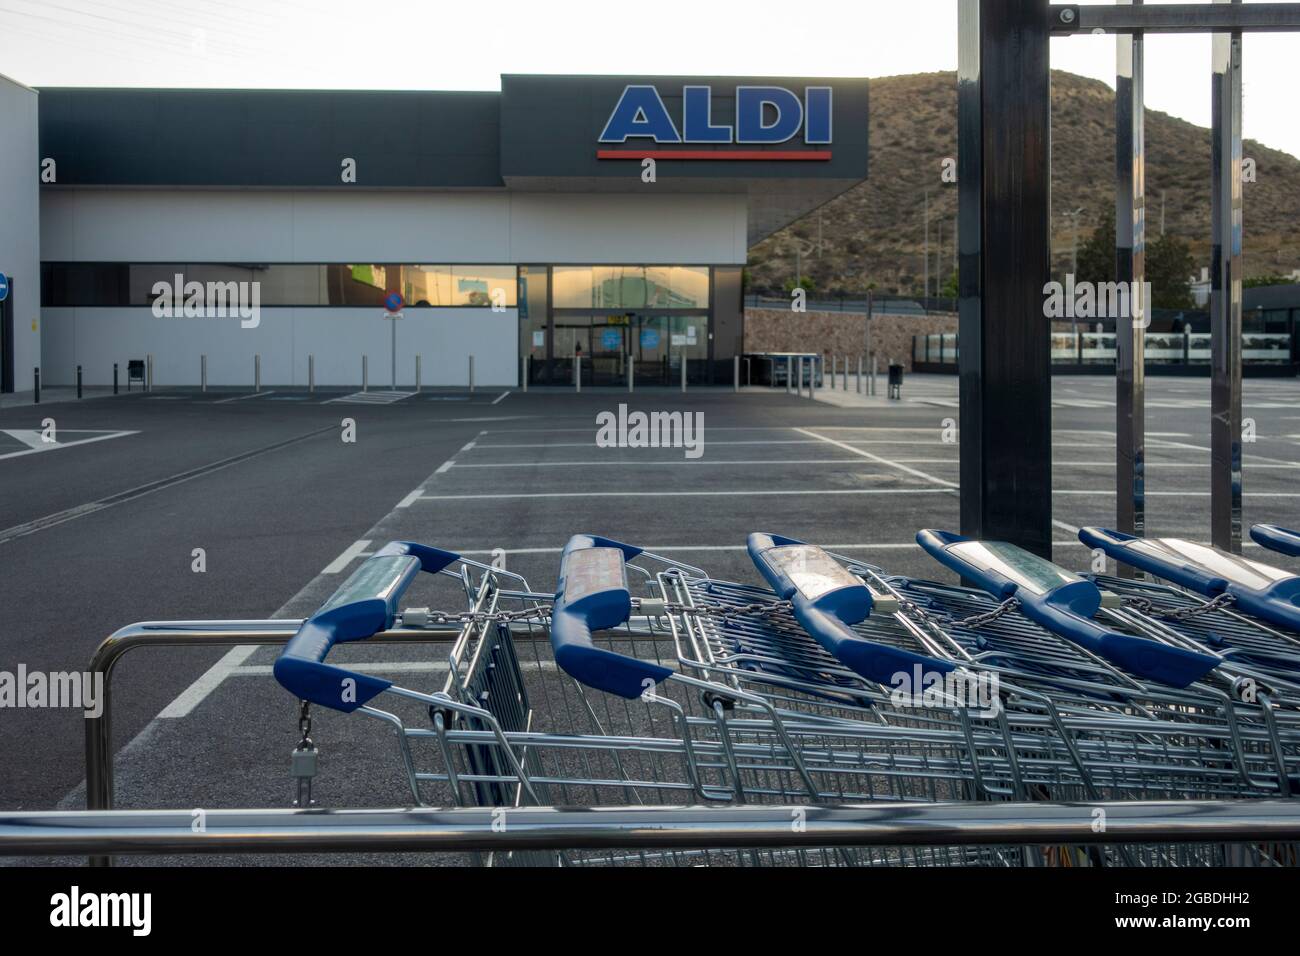 MADRID, SPAIN - JULY 16, 2021: Shopping carts in a shopping park, close to Aldi supermarket Stock Photo